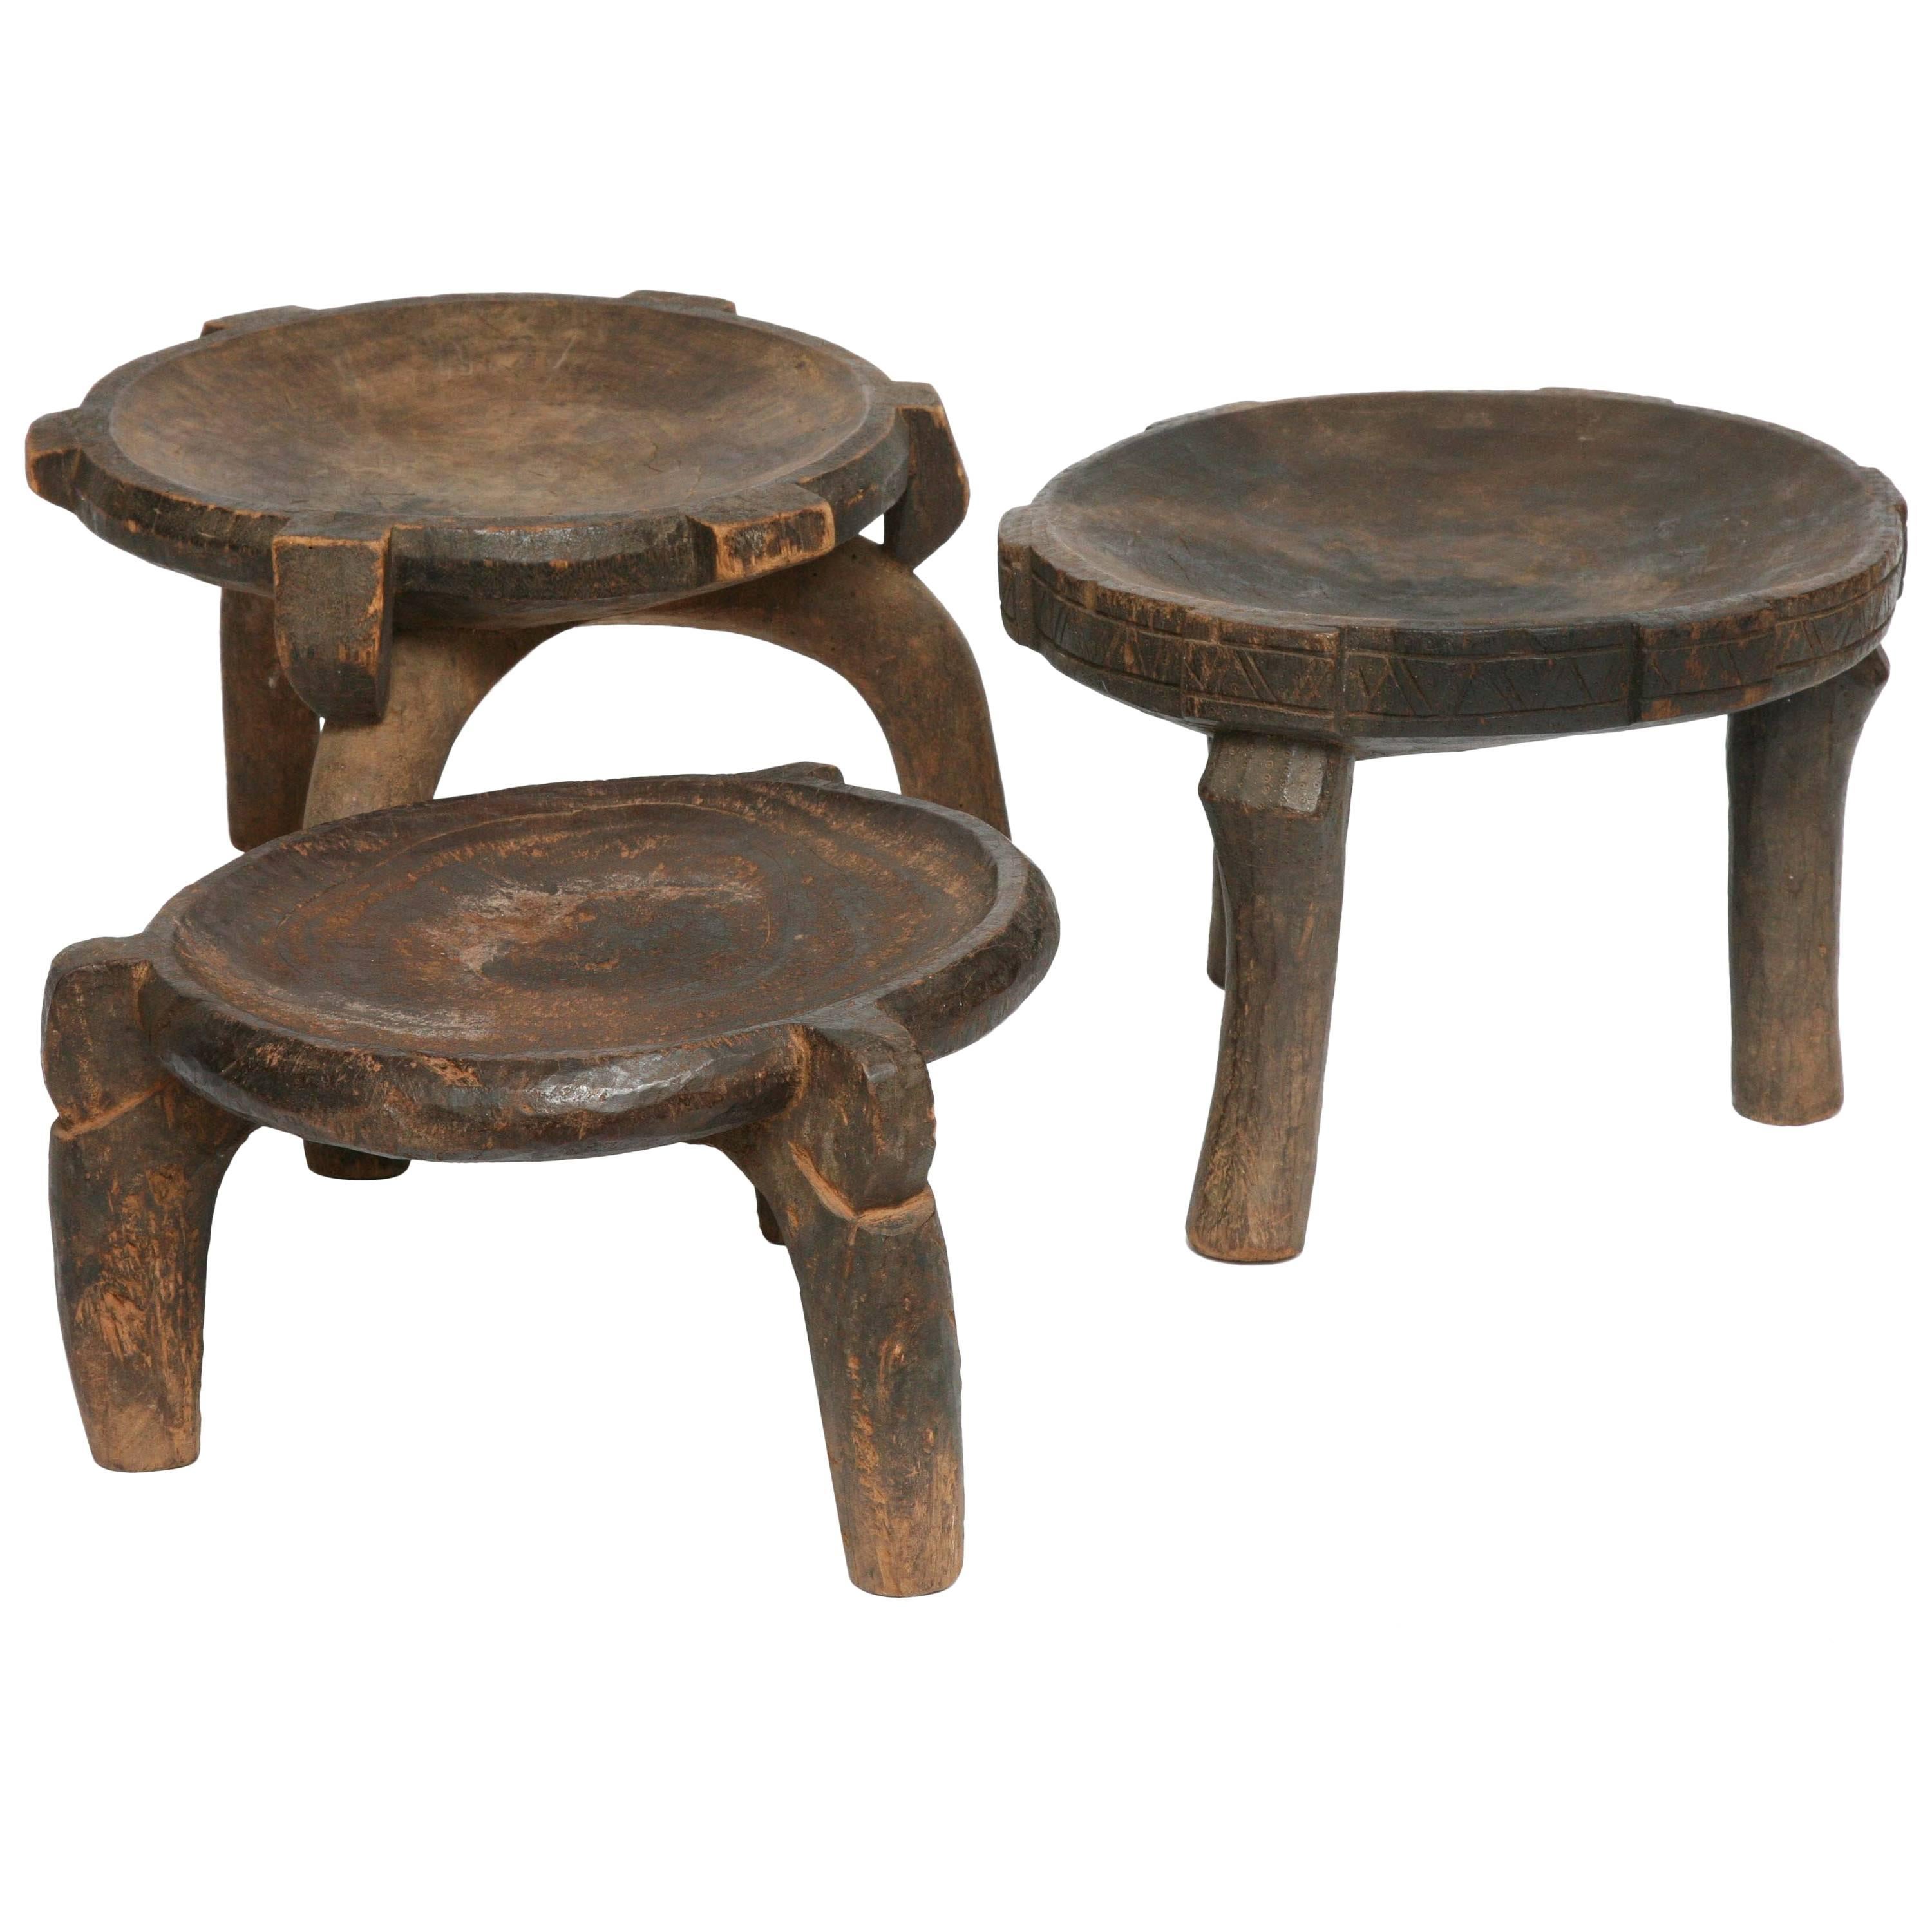 Three African Stools, Ethiopian, Hand-Carved, with Distinct Differences